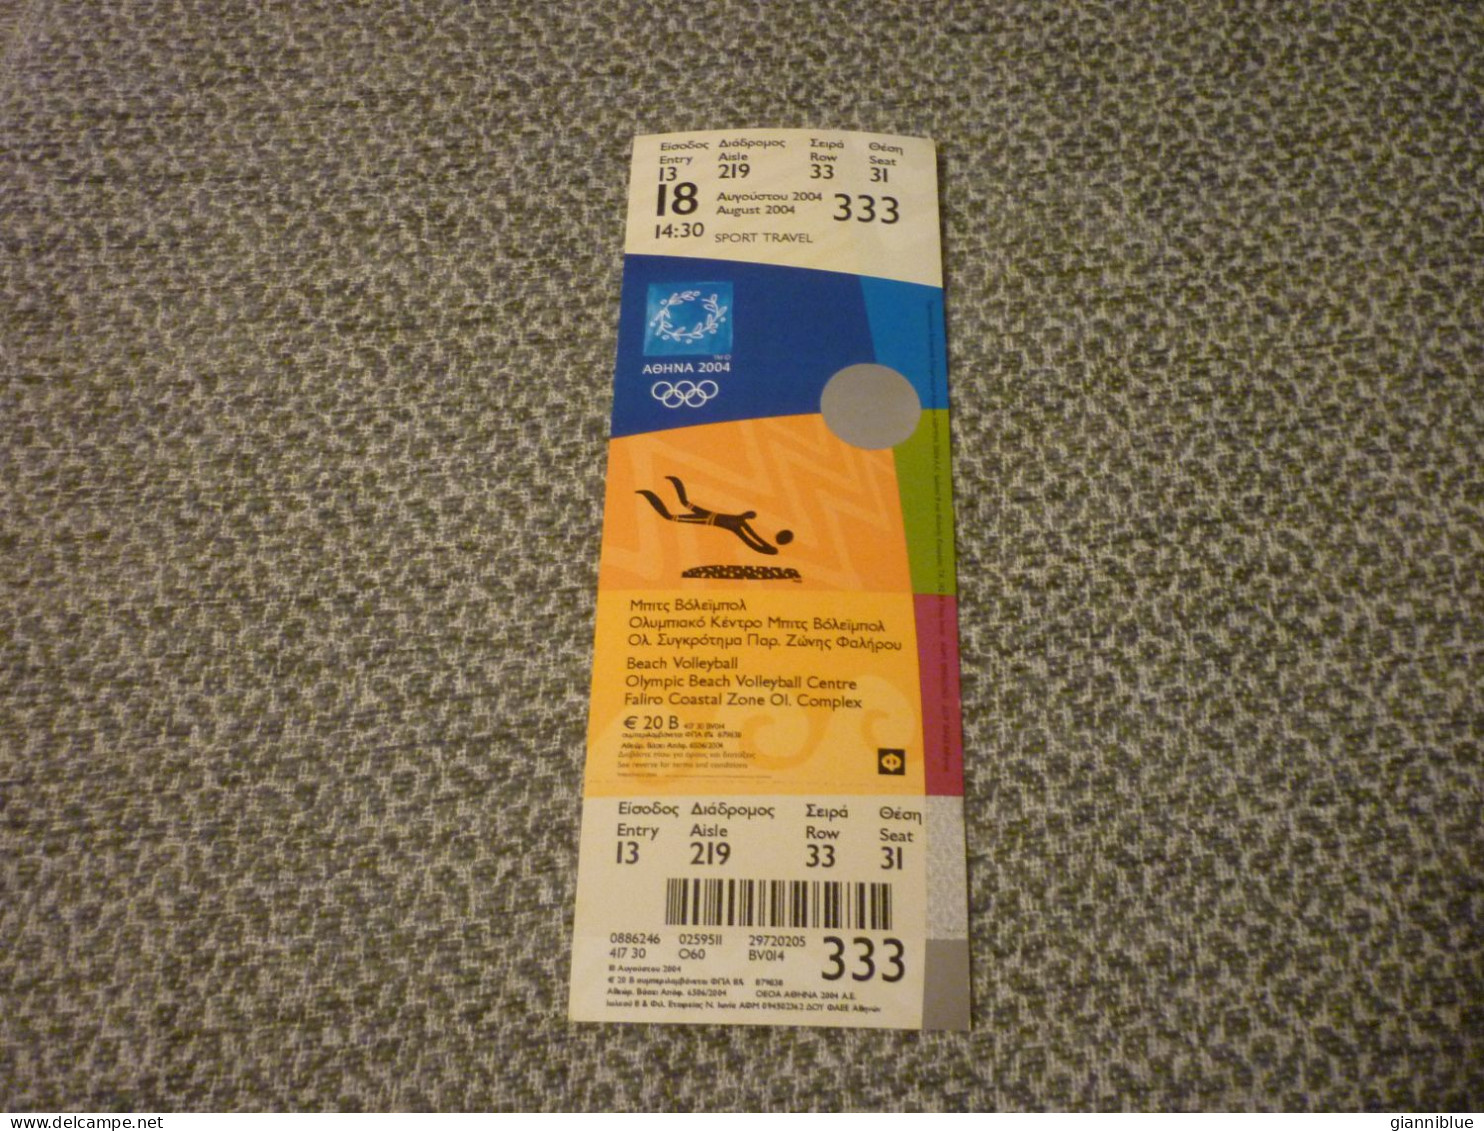 Beach Volleyball Athens 2004 Olympic Games Greece Greek Mint Unused Match Ticket Stub 18/08/2004 14:30 #333 - Habillement, Souvenirs & Autres